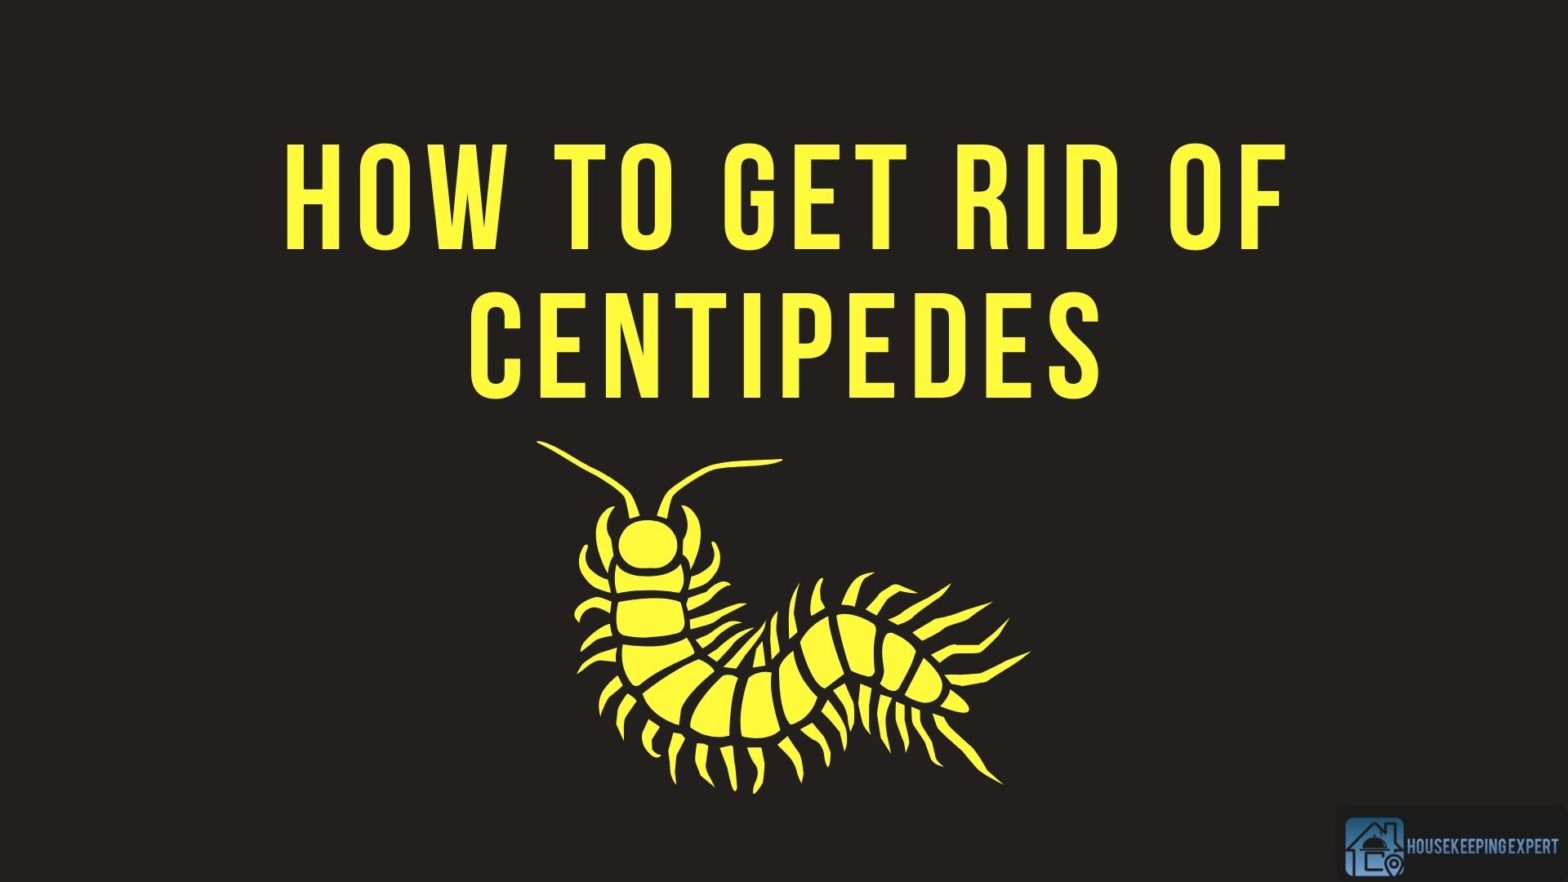 How To Get Rid Of Centipedes